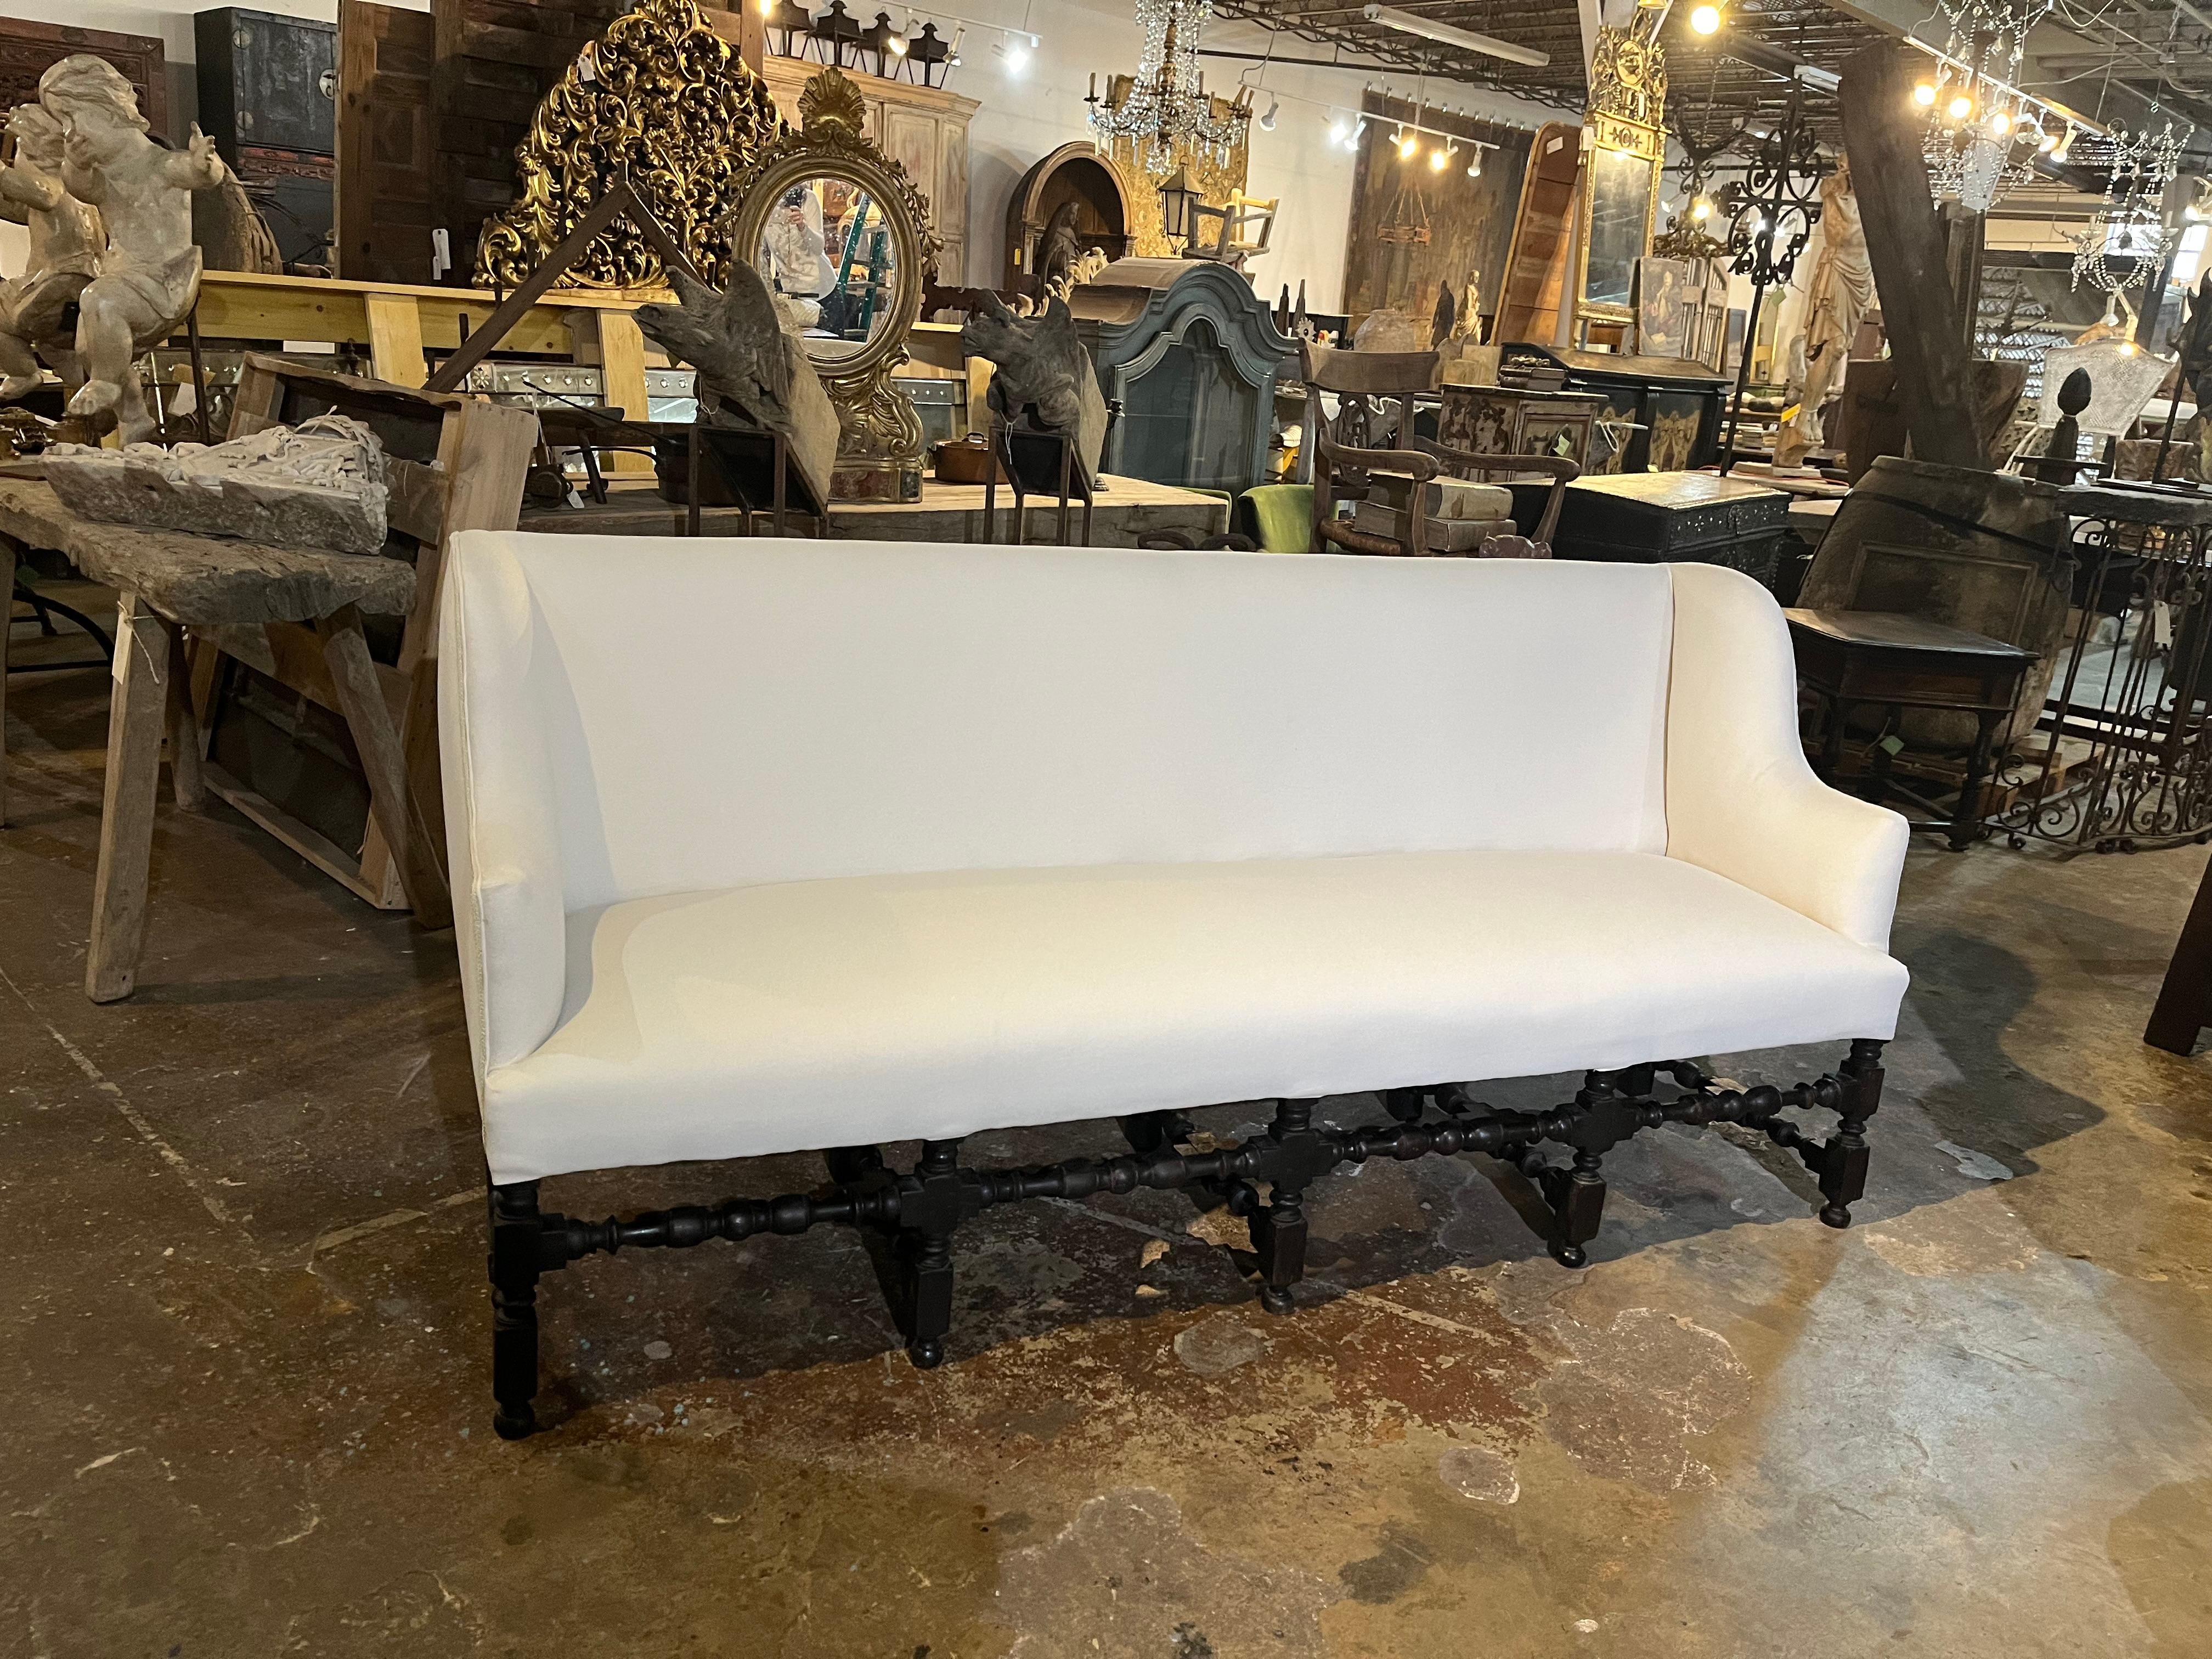 A very handsome Mid-19th Century French Louis XIII style settee - sofa. Soundly constructed from richly ebonized oak and recently reupholstered. The seat is supported by four beautifully turned front legs connected by turned center stretchers to the